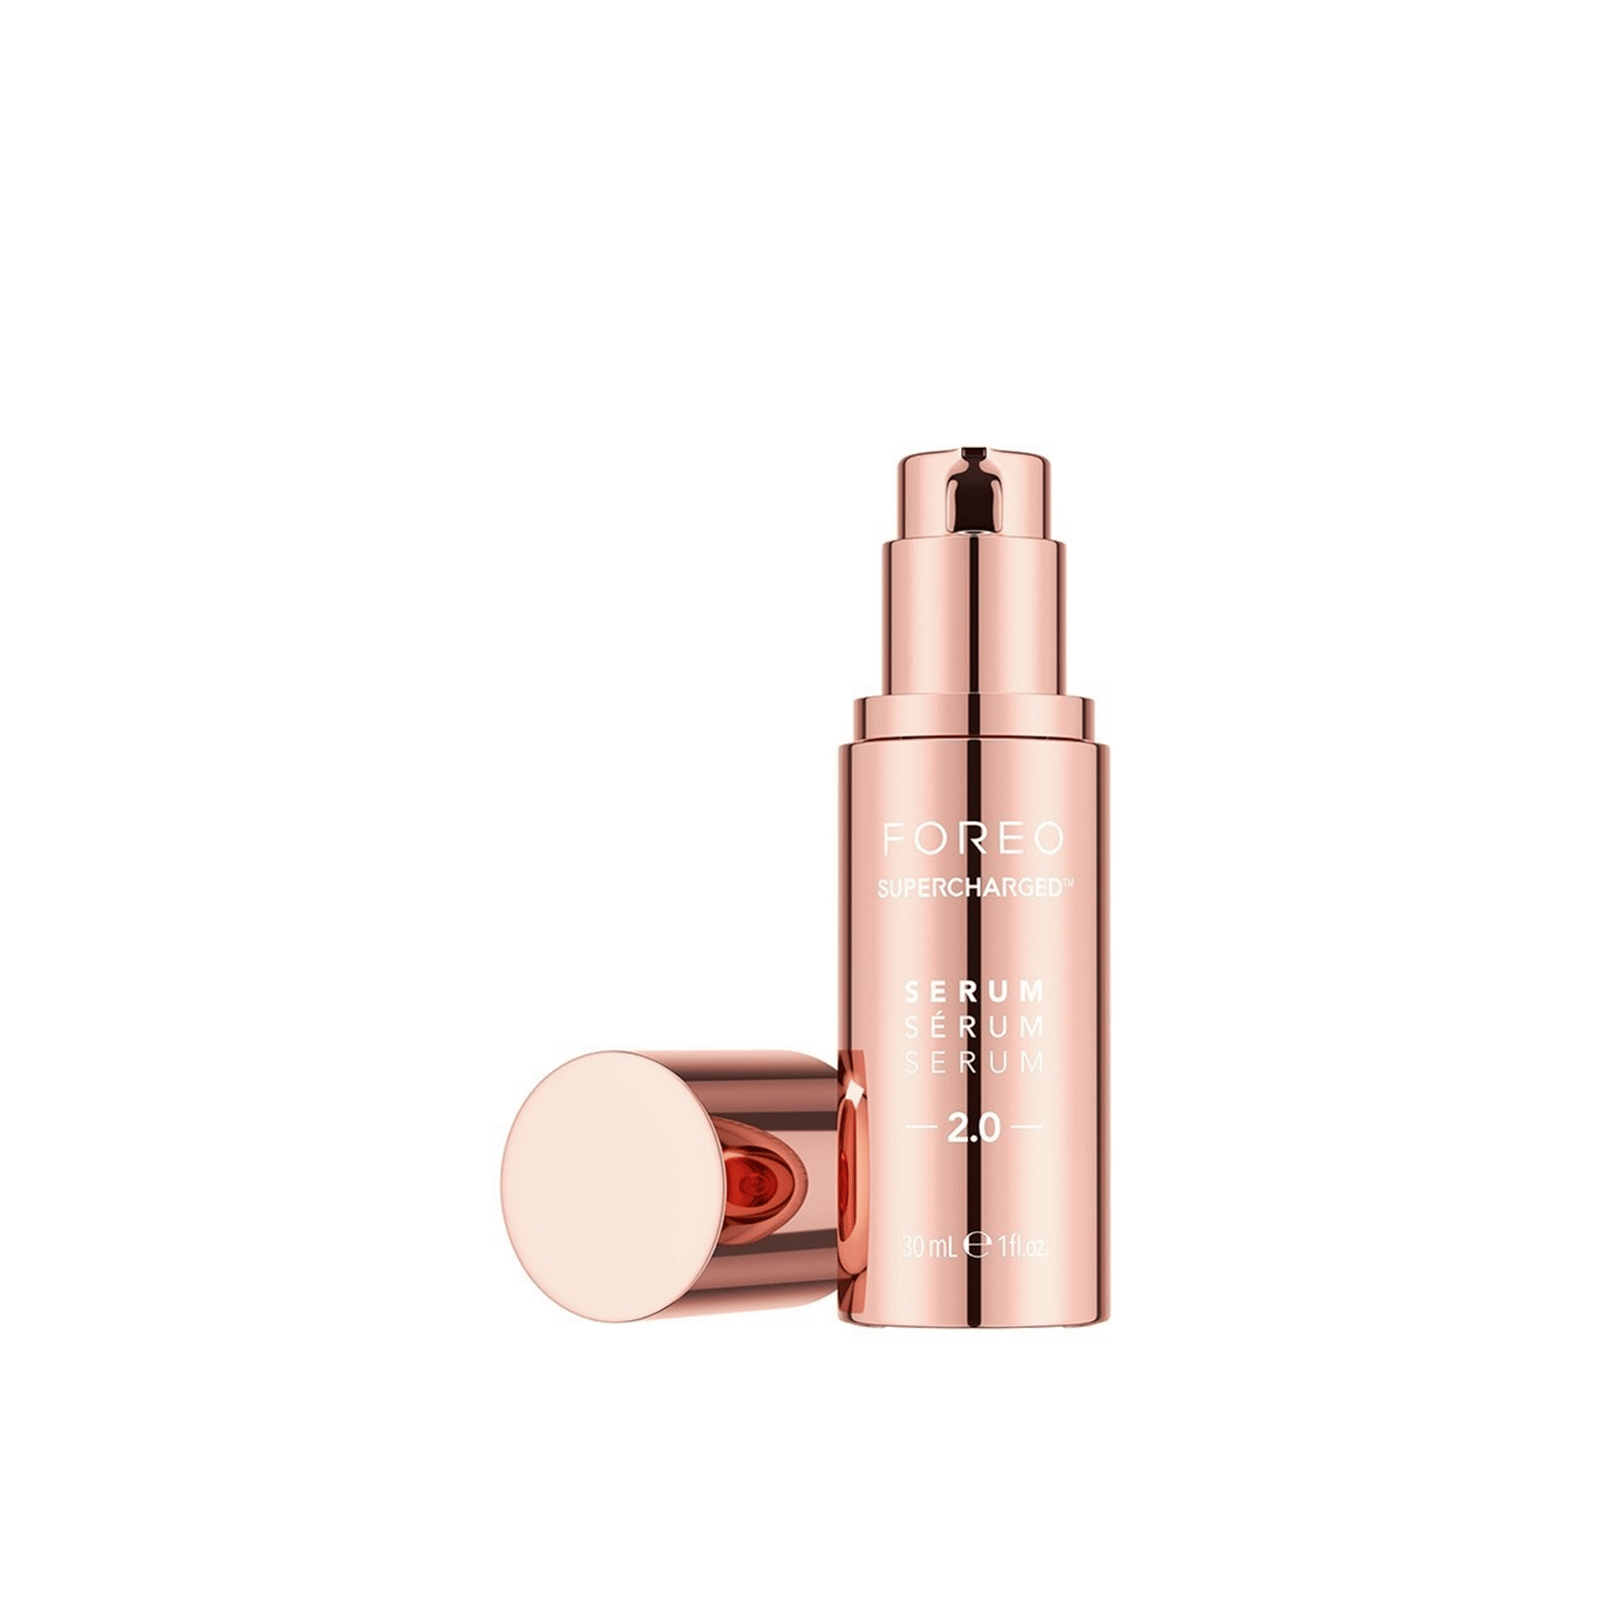 FOREO SUPERCHARGED™ Serum 2.0 30ml